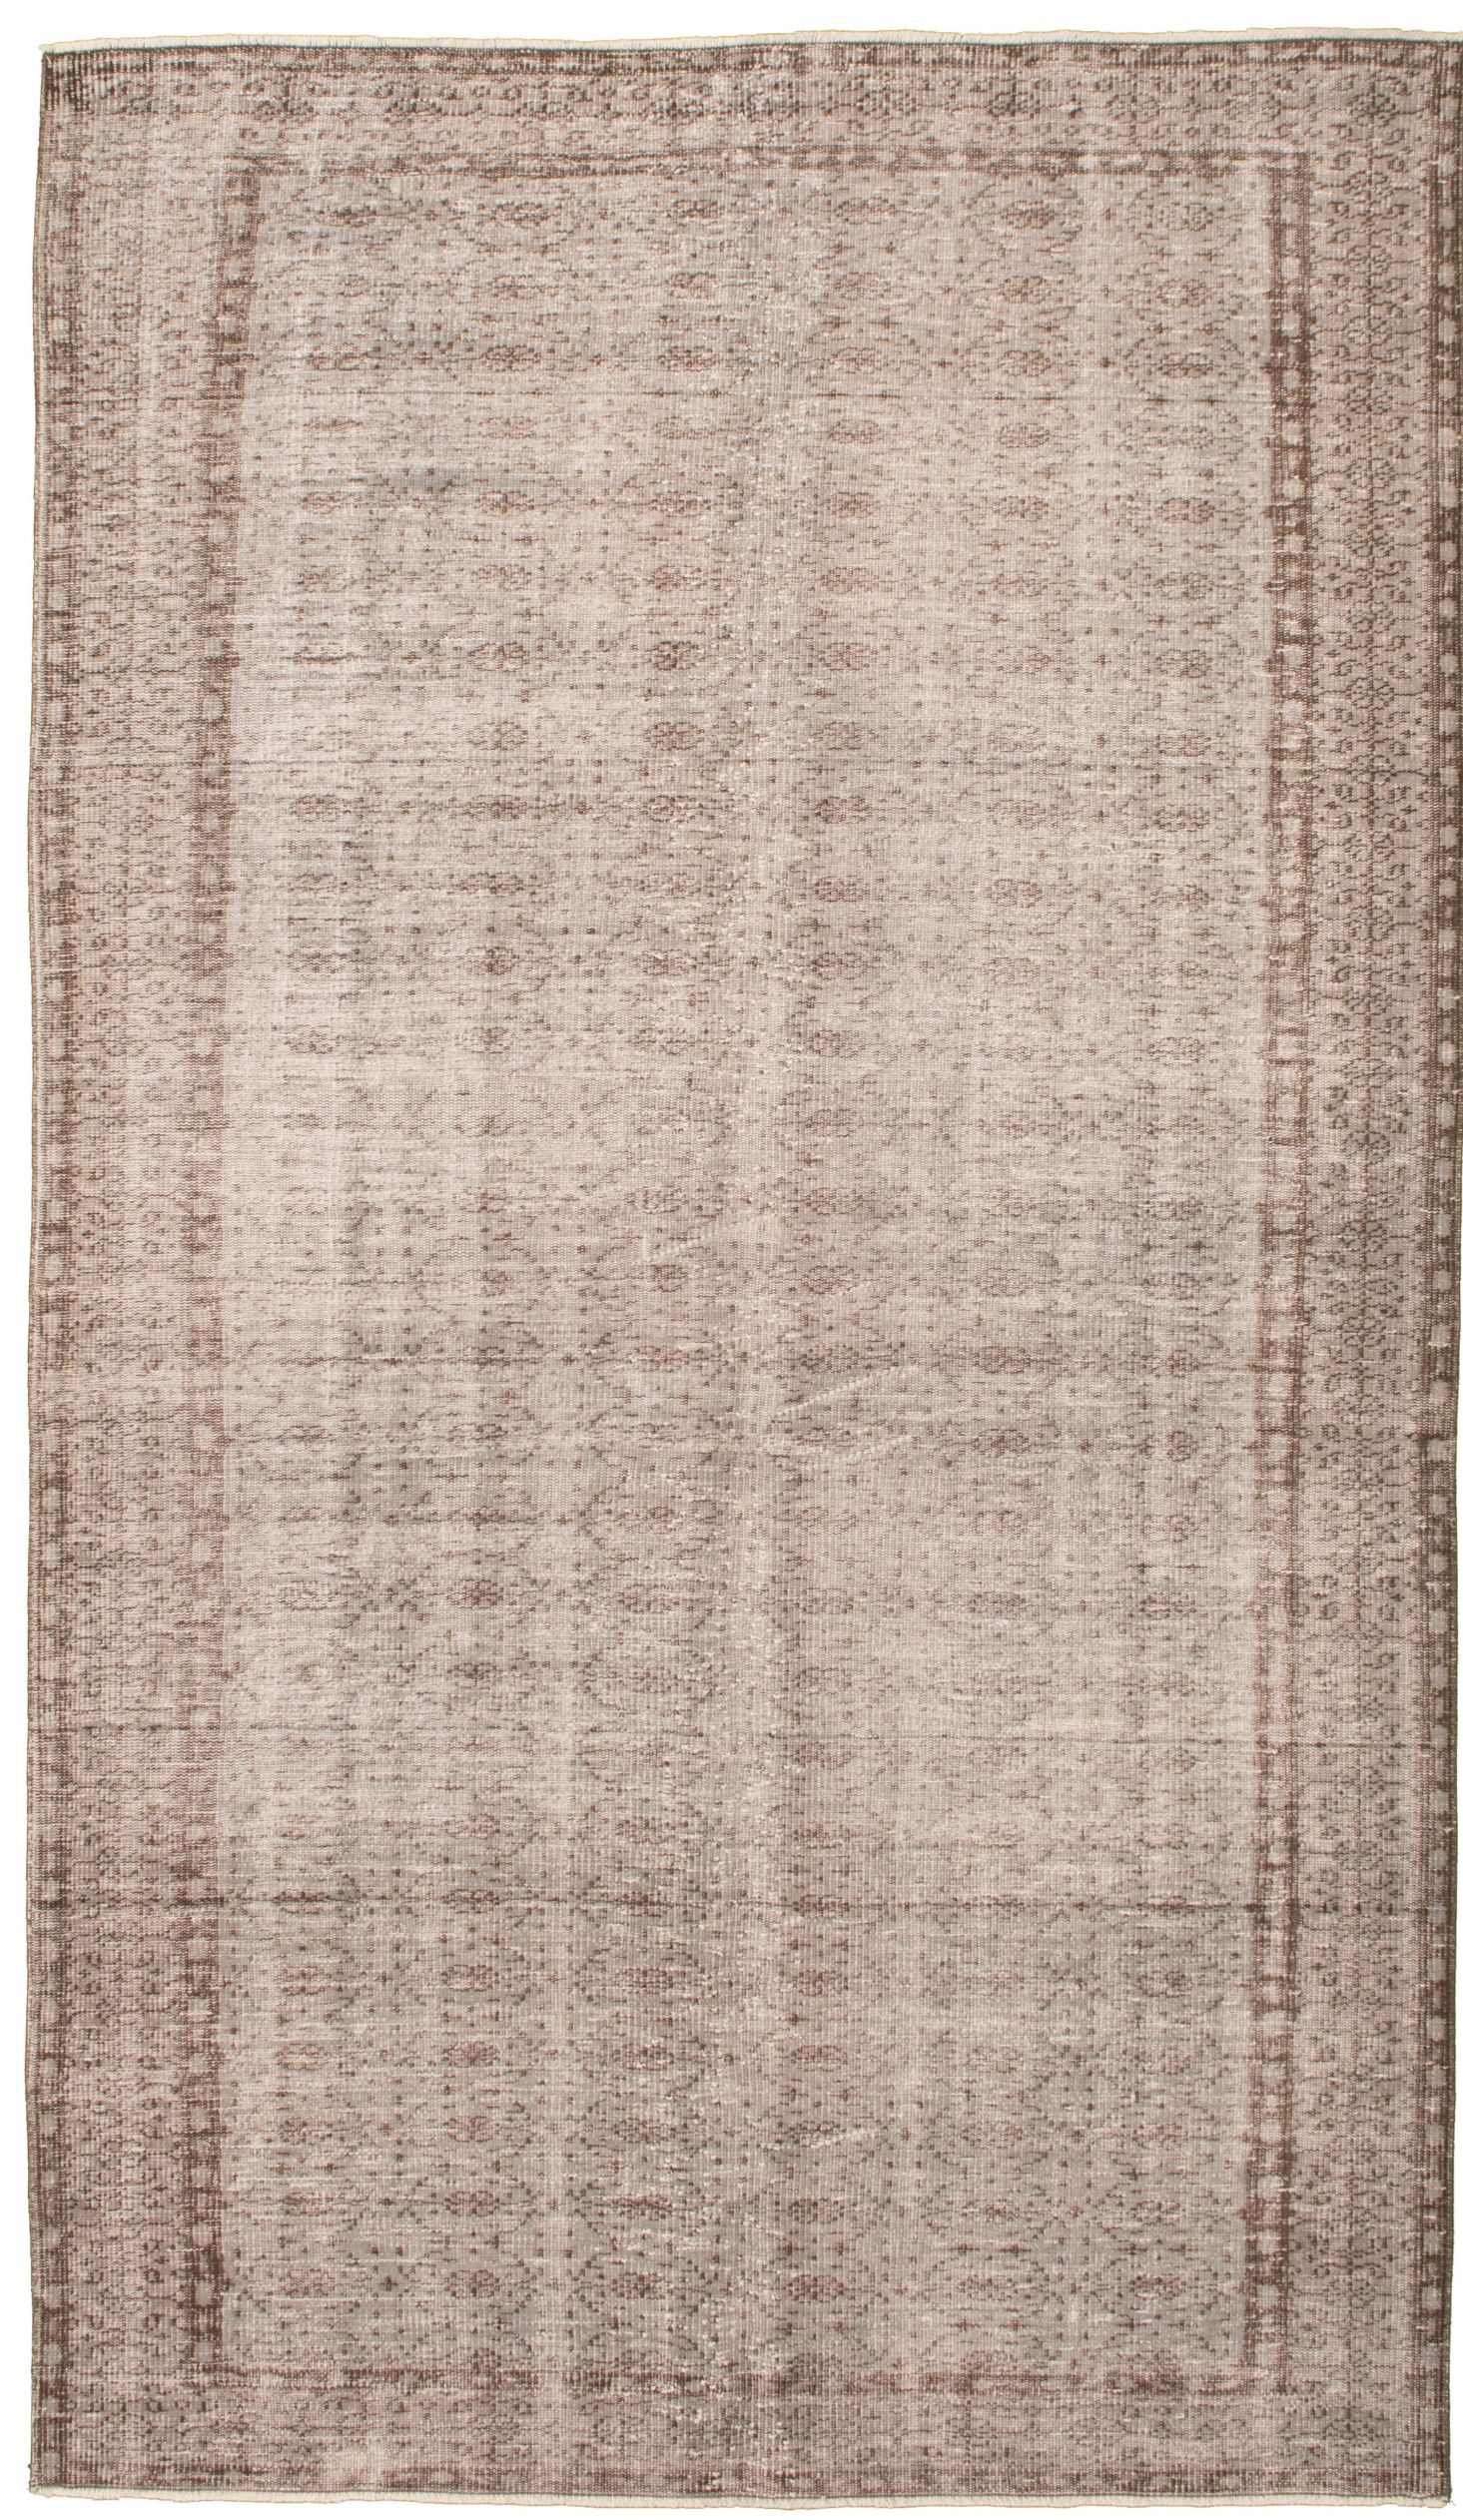 Hand-knotted Color Transition Light Grey Wool Rug 5'3" x 9'5" Size: 5'3" x 9'5"  